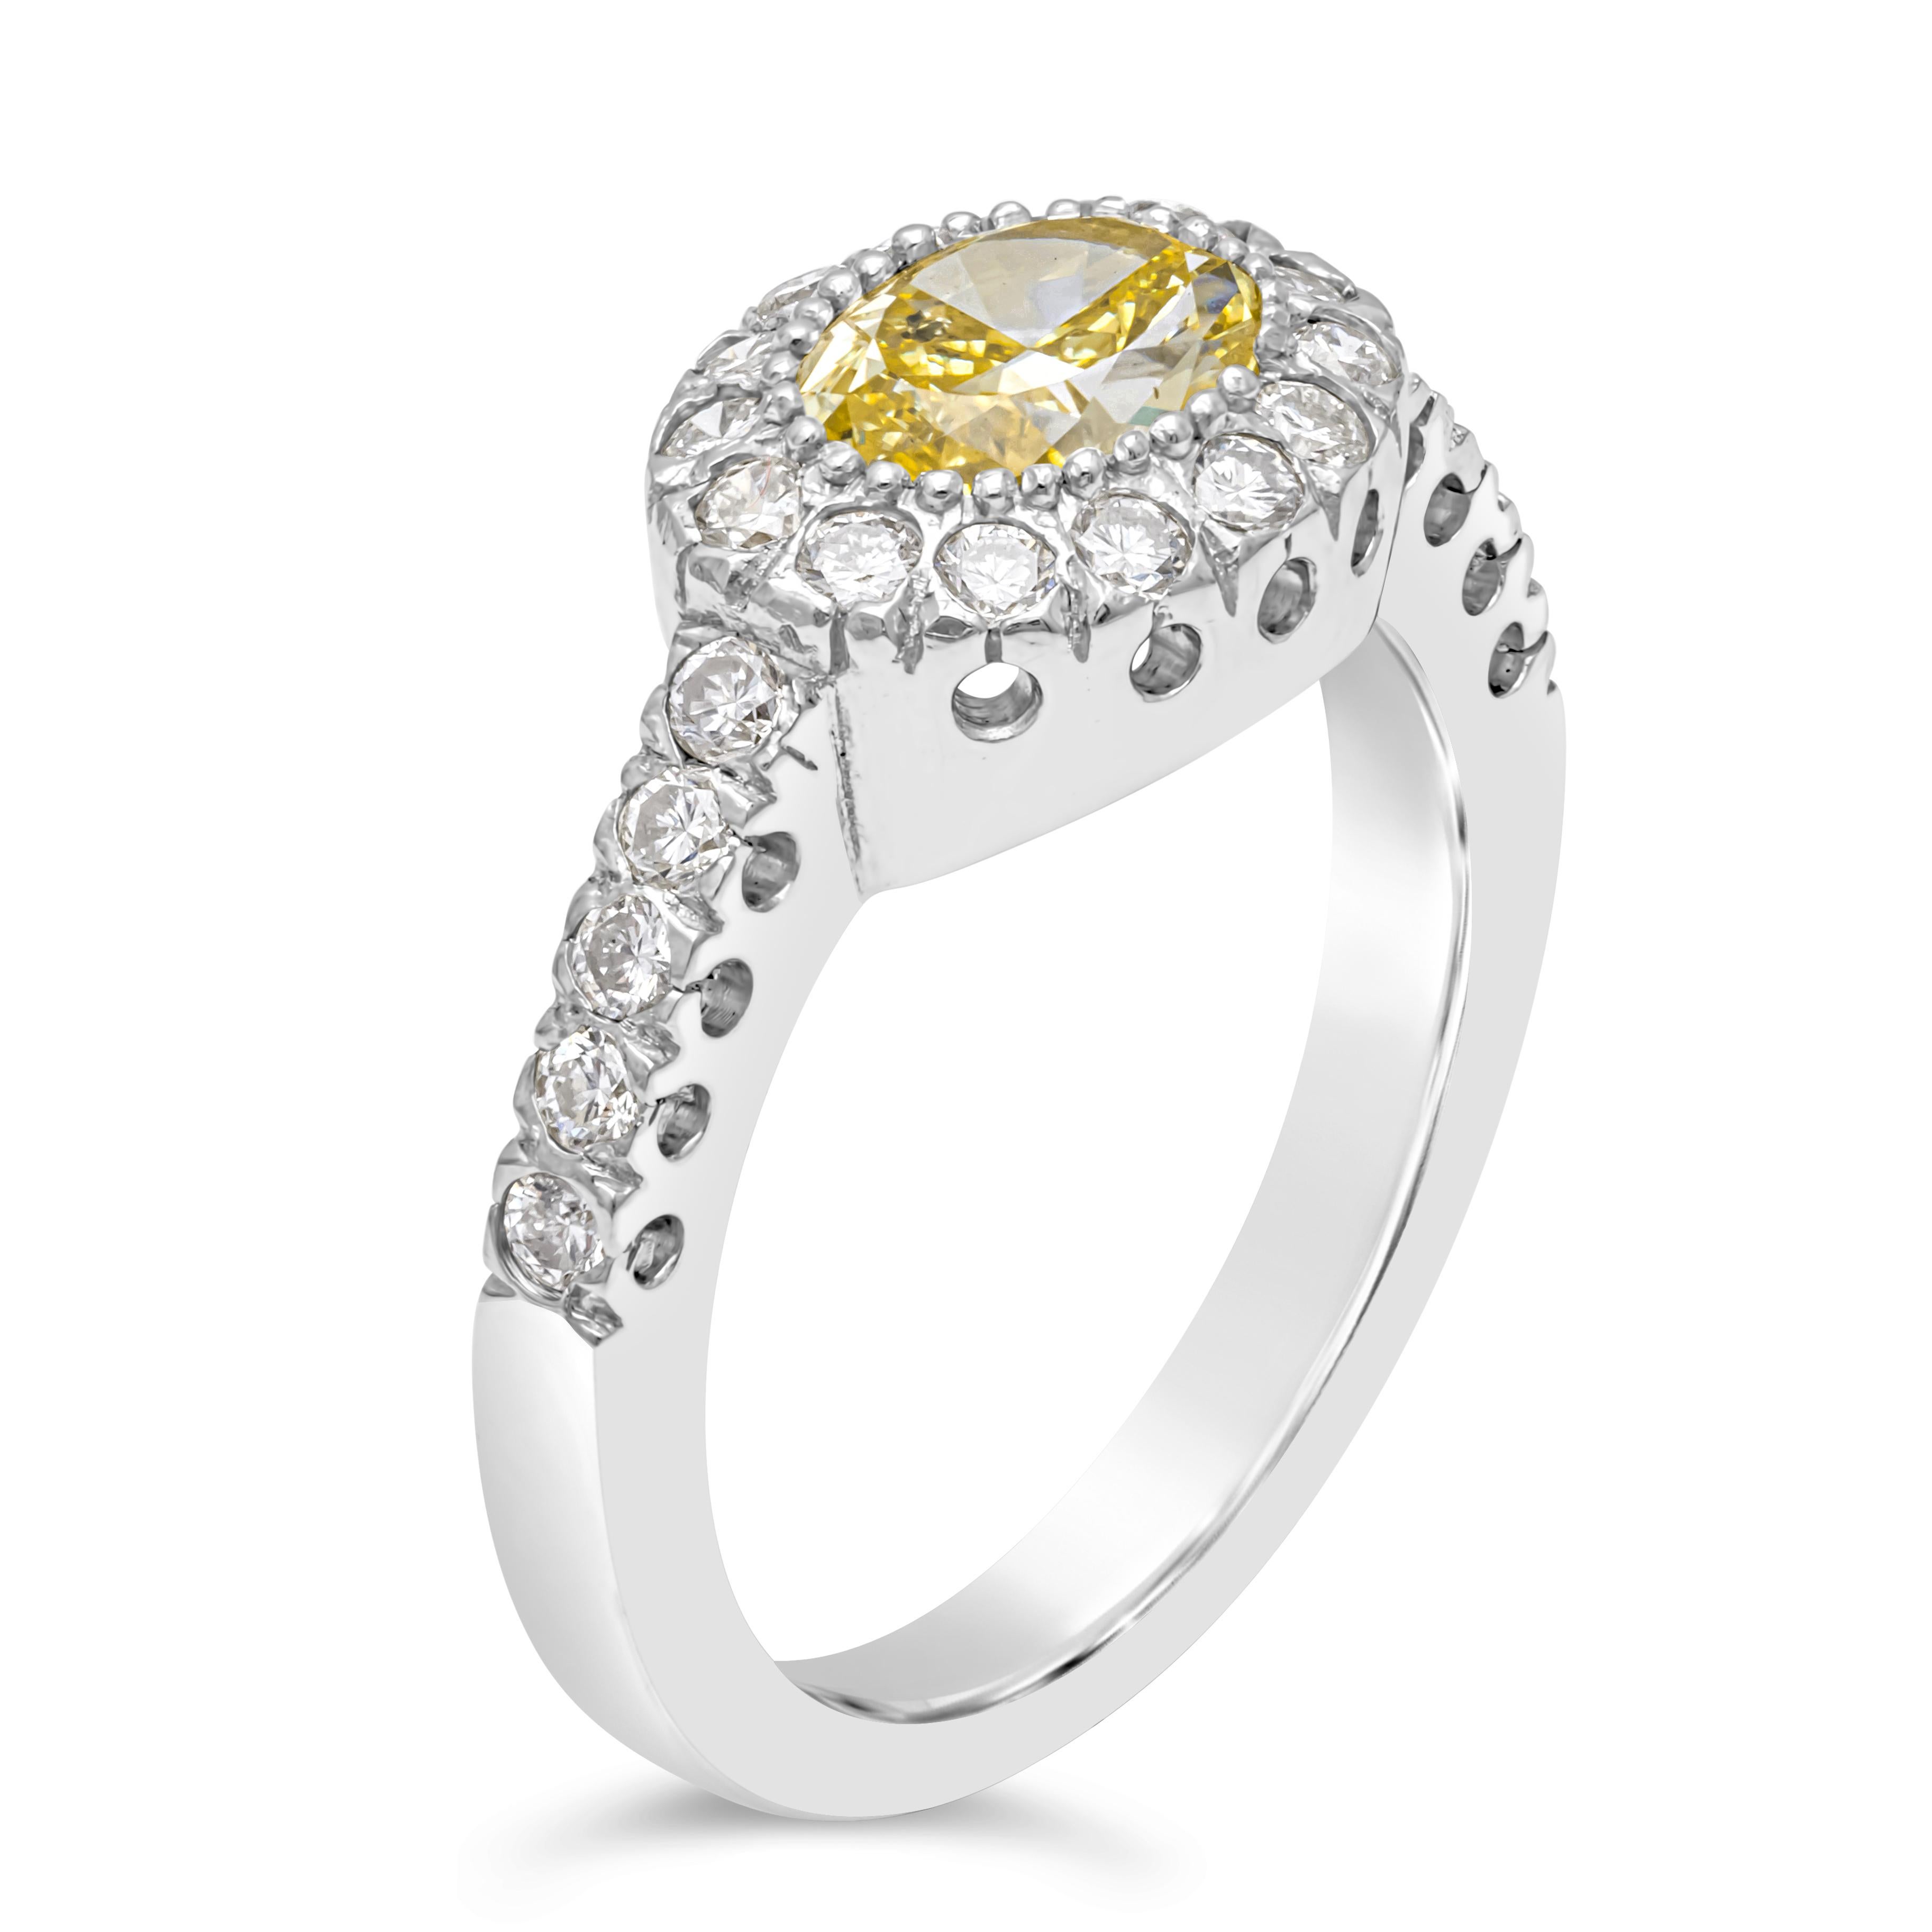 A well-crafted engagement ring, showcasing a GIA certified 1.03 carats oval cut Fancy Yellow diamond. Accented by a beautiful halo of 24 round brilliant cut diamonds that continue on to the shank with a half-way infinity setting, weighing 0.36 carat